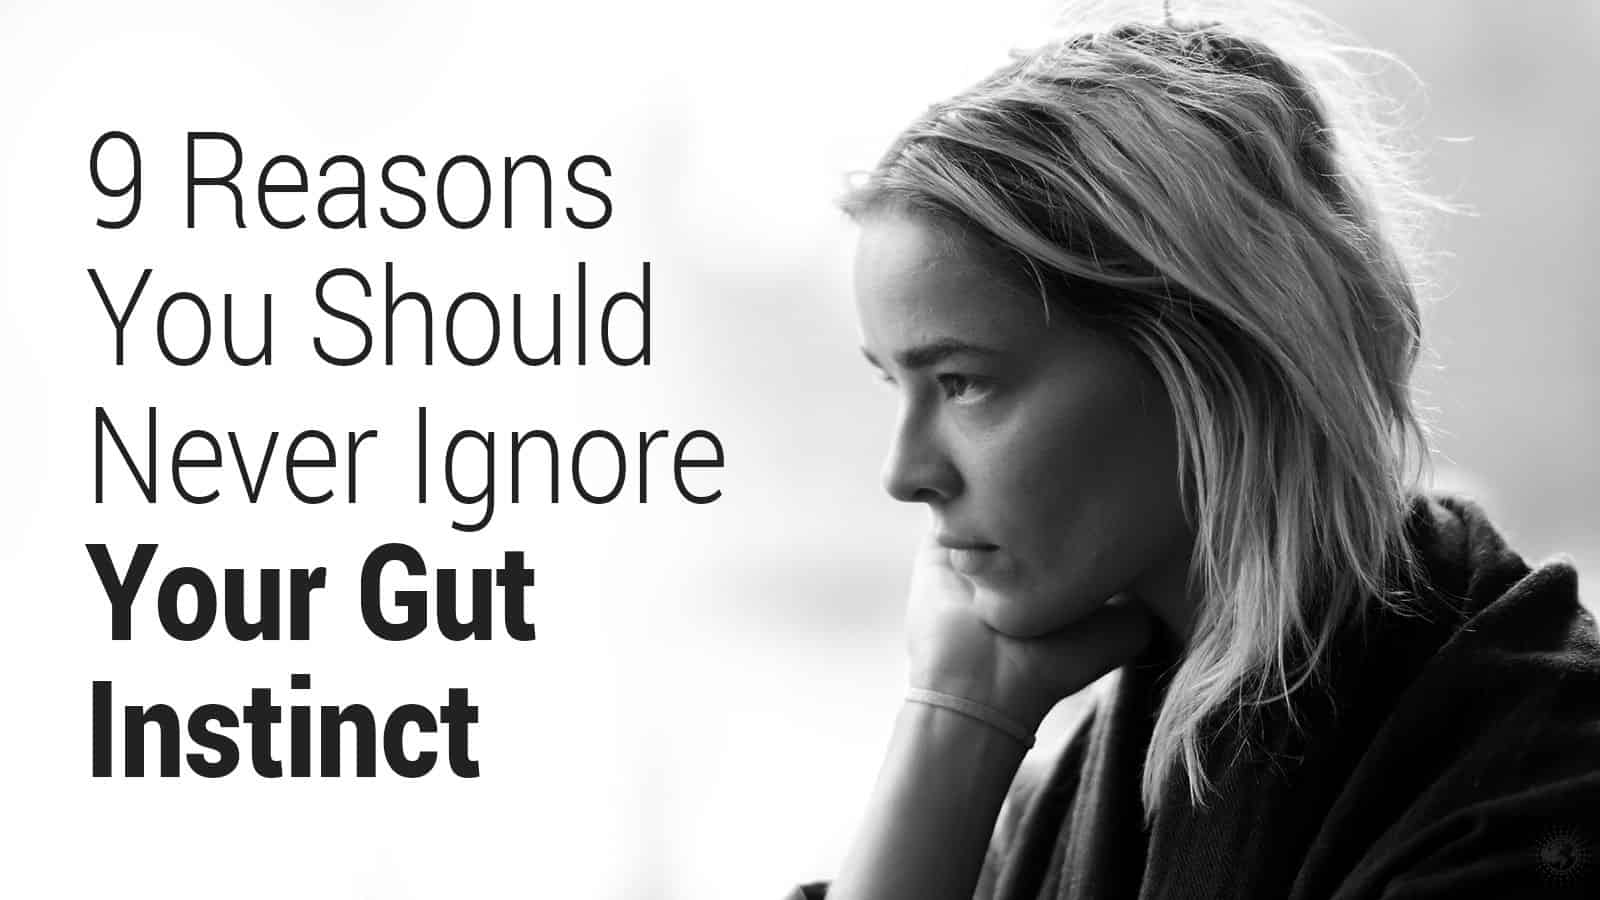 Reasons You Should Never Ignore Your Gut Instinct